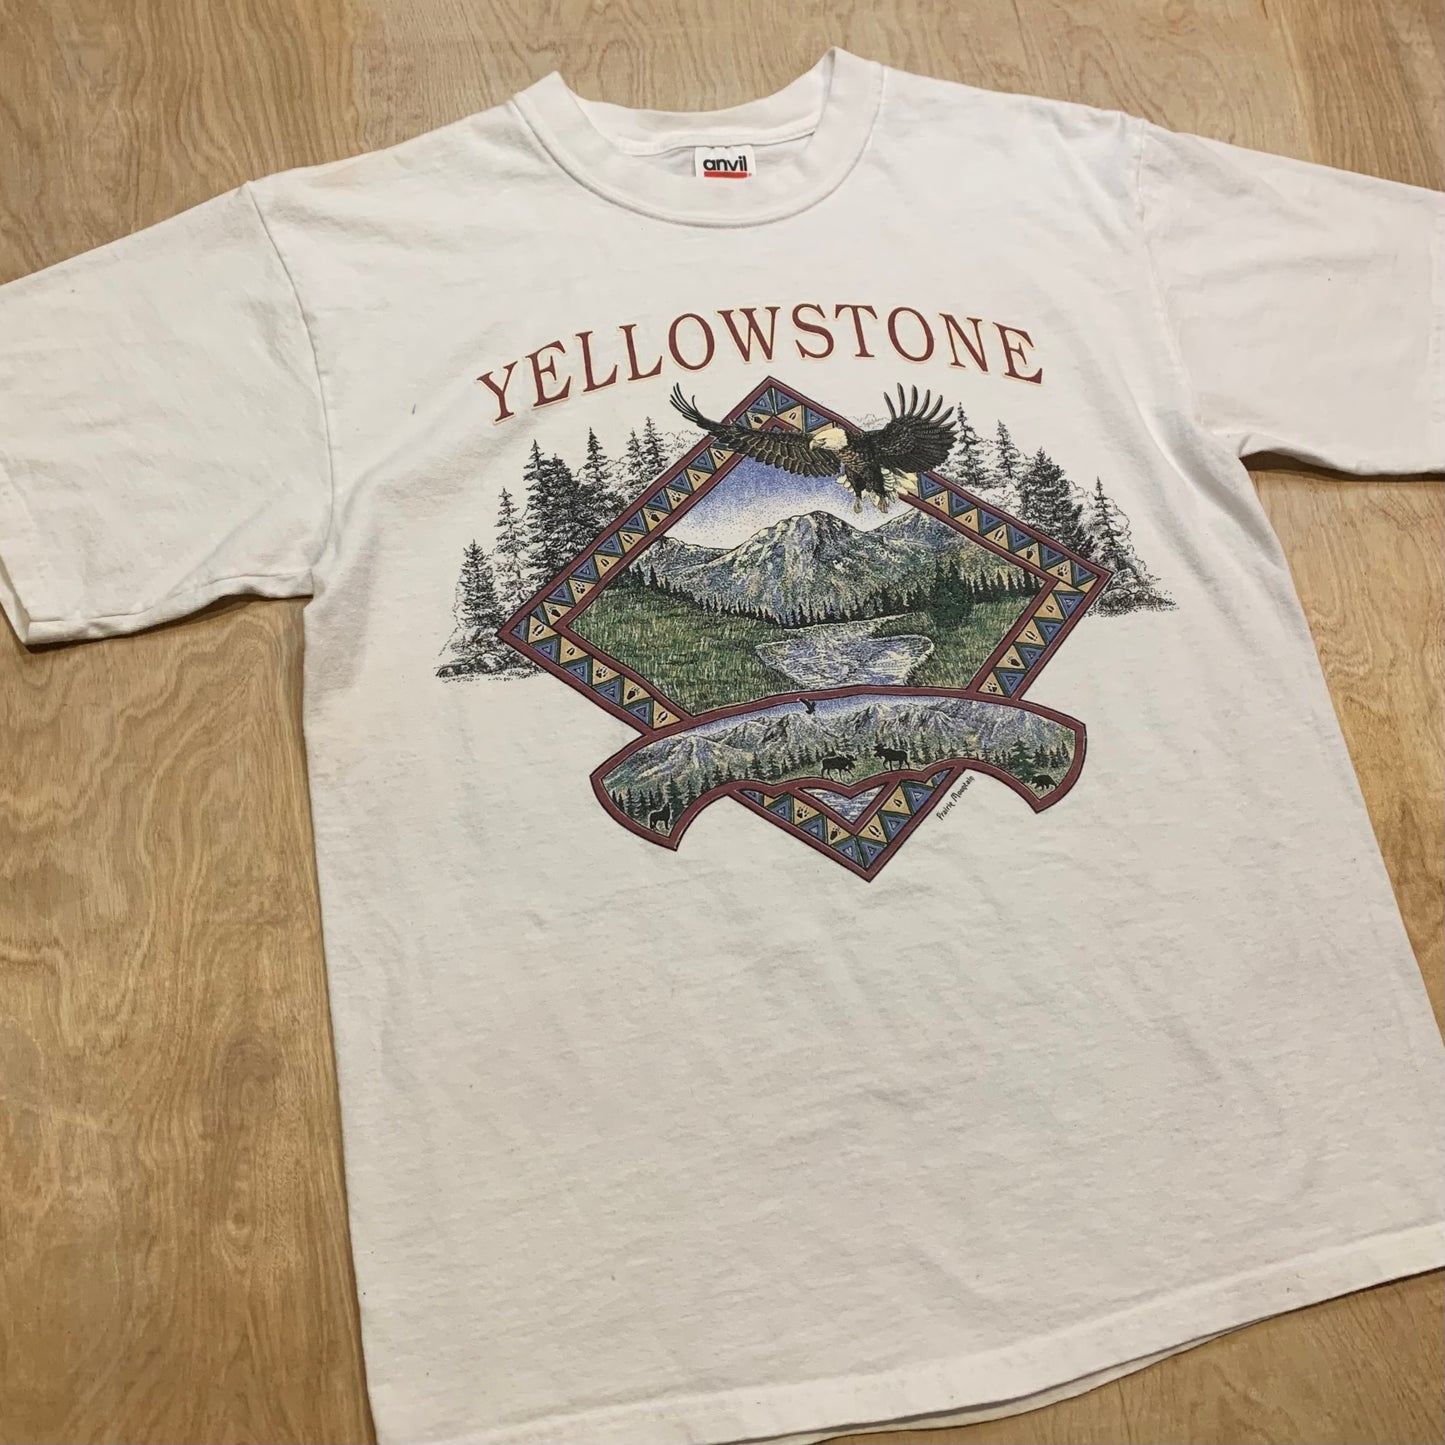 Vintage Yellowstone and Eagle T-Shirt